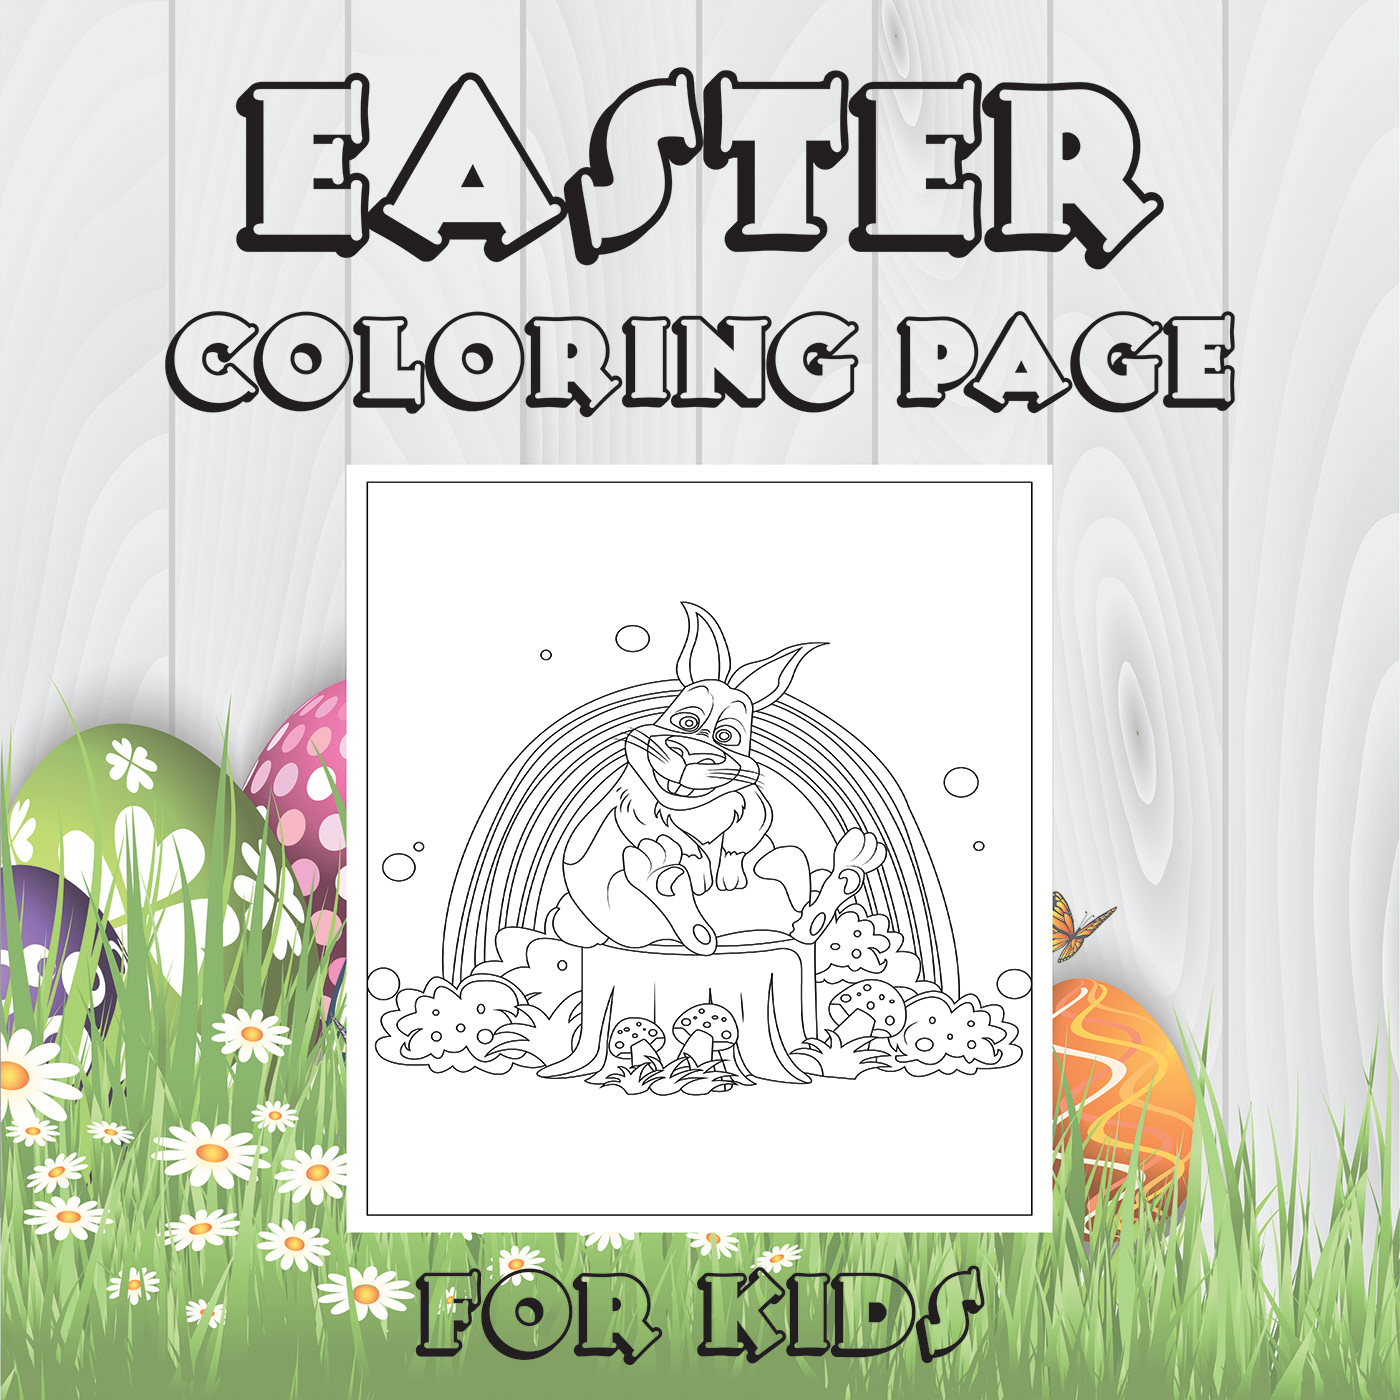 coloring coloringbook coloringpages Easter easter bunny Easter Egg bunny ILLUSTRATION  easterbook eastercoloringbook